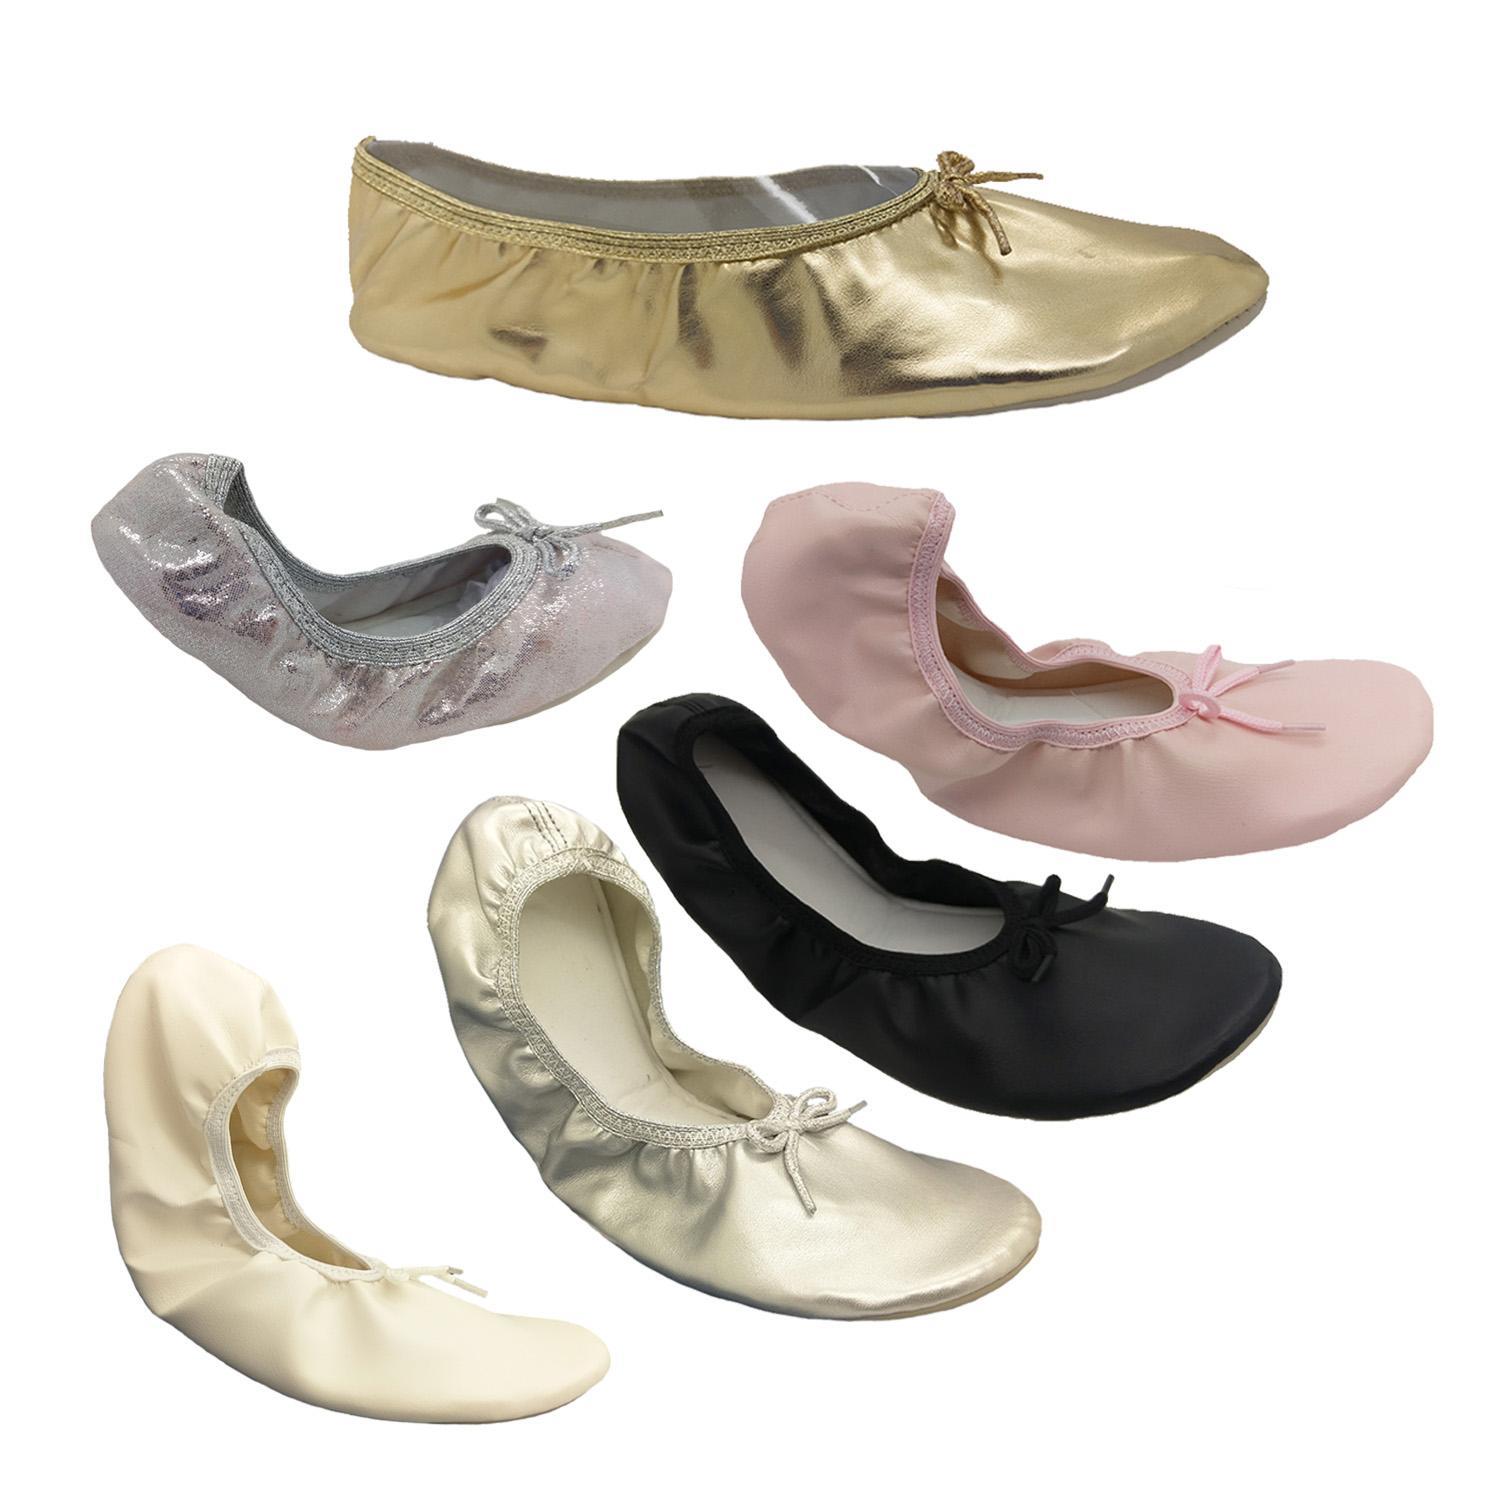 Girls Genuine Jiffies Classic Ballet Flats Elastic Edge Soft Insole Size 5 - 3-Silver Distressed-2-3